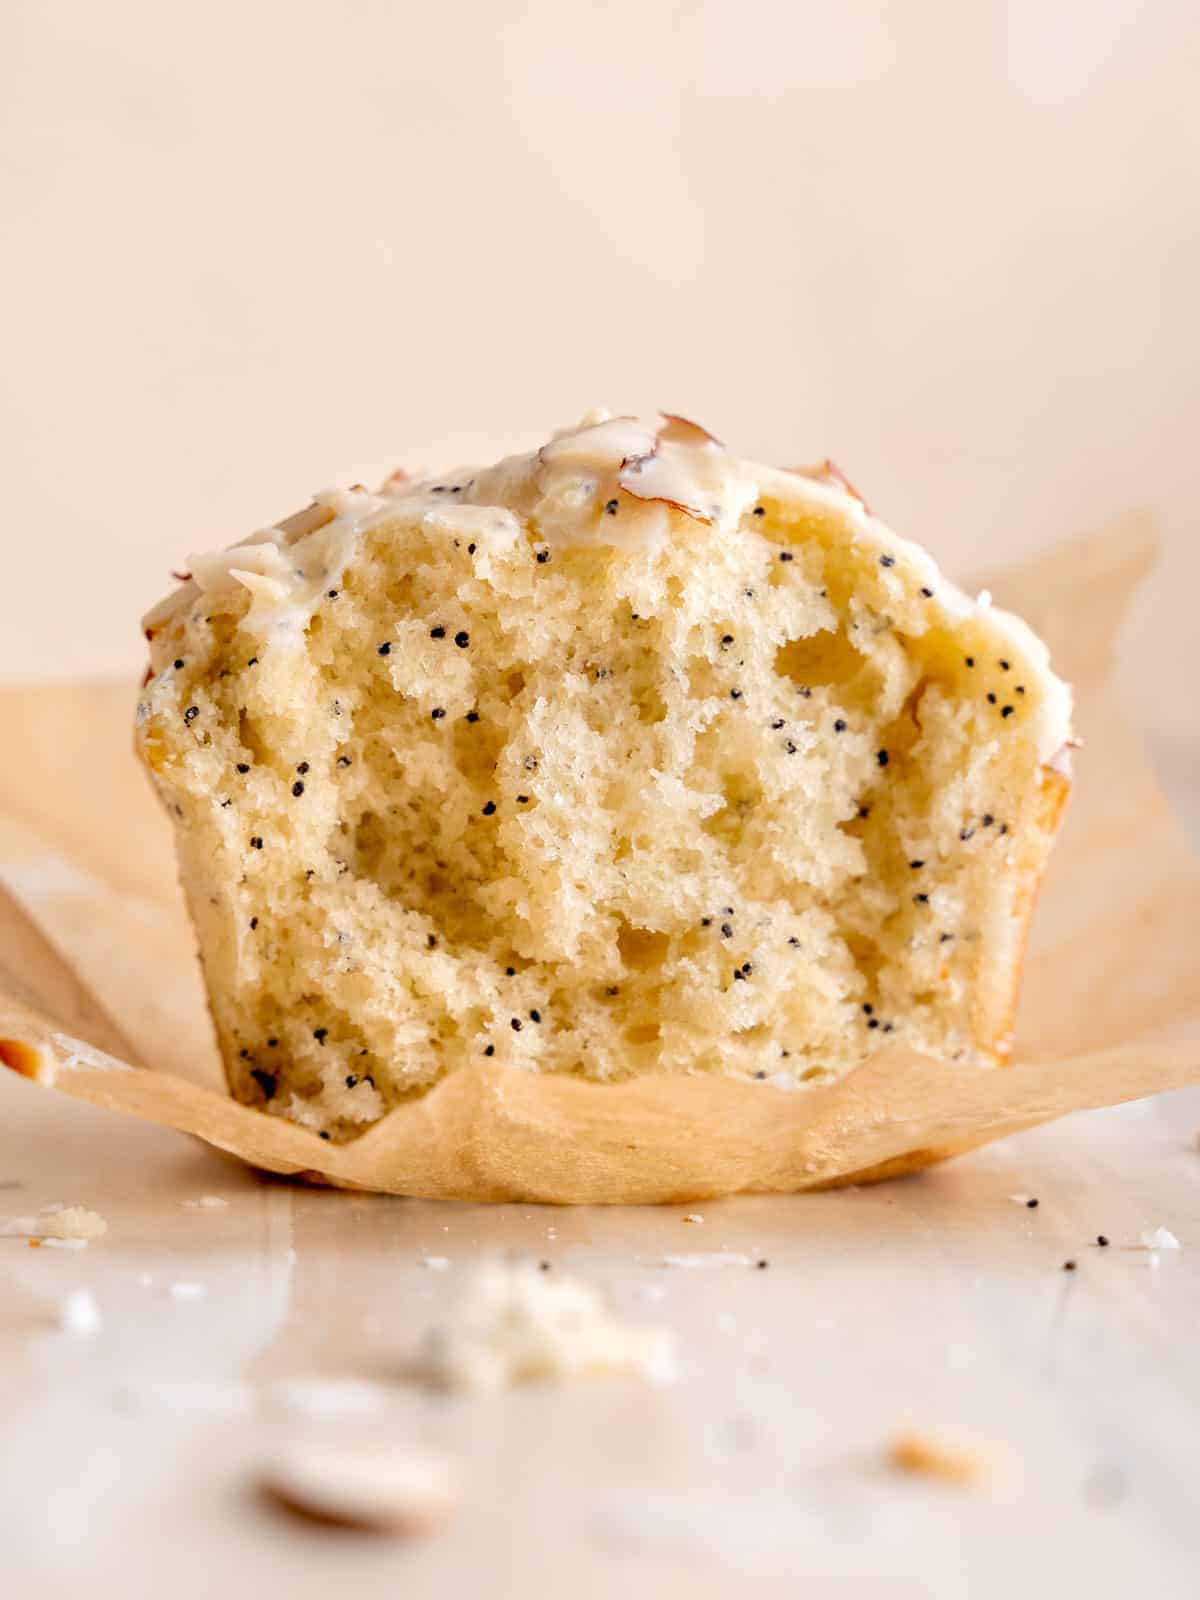 A side shot of a poppy seed muffin cut in half.